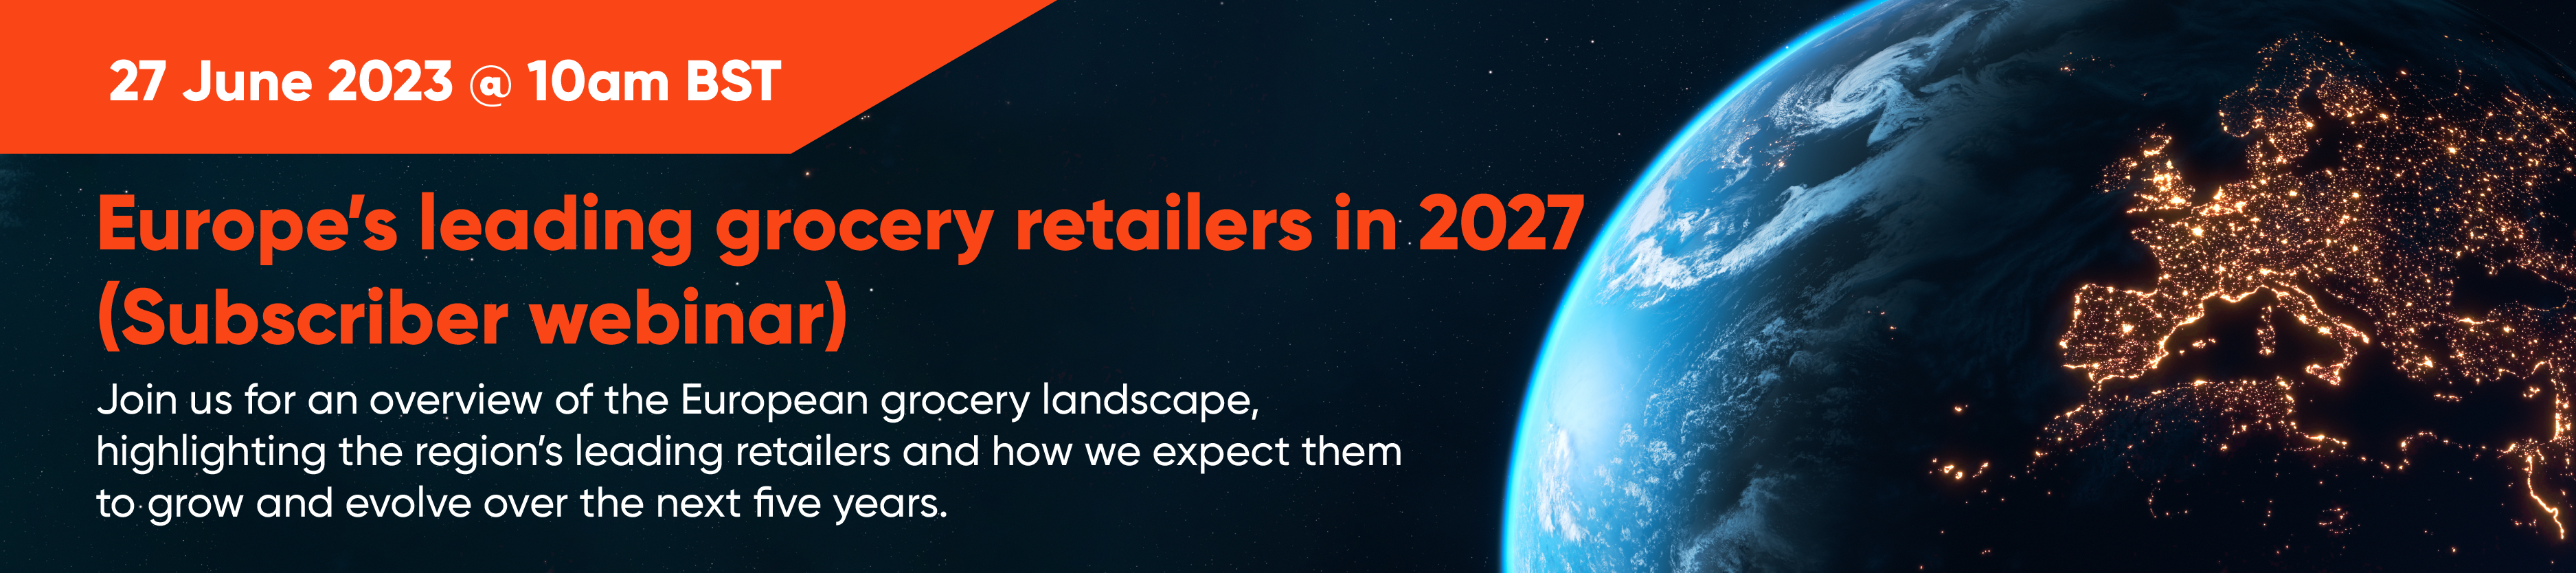 Join our subscriber webinar for an overview of the European grocery landscape, highlighting the region’s leading retailers and how we expect them to grow and evolve over the next five years. 